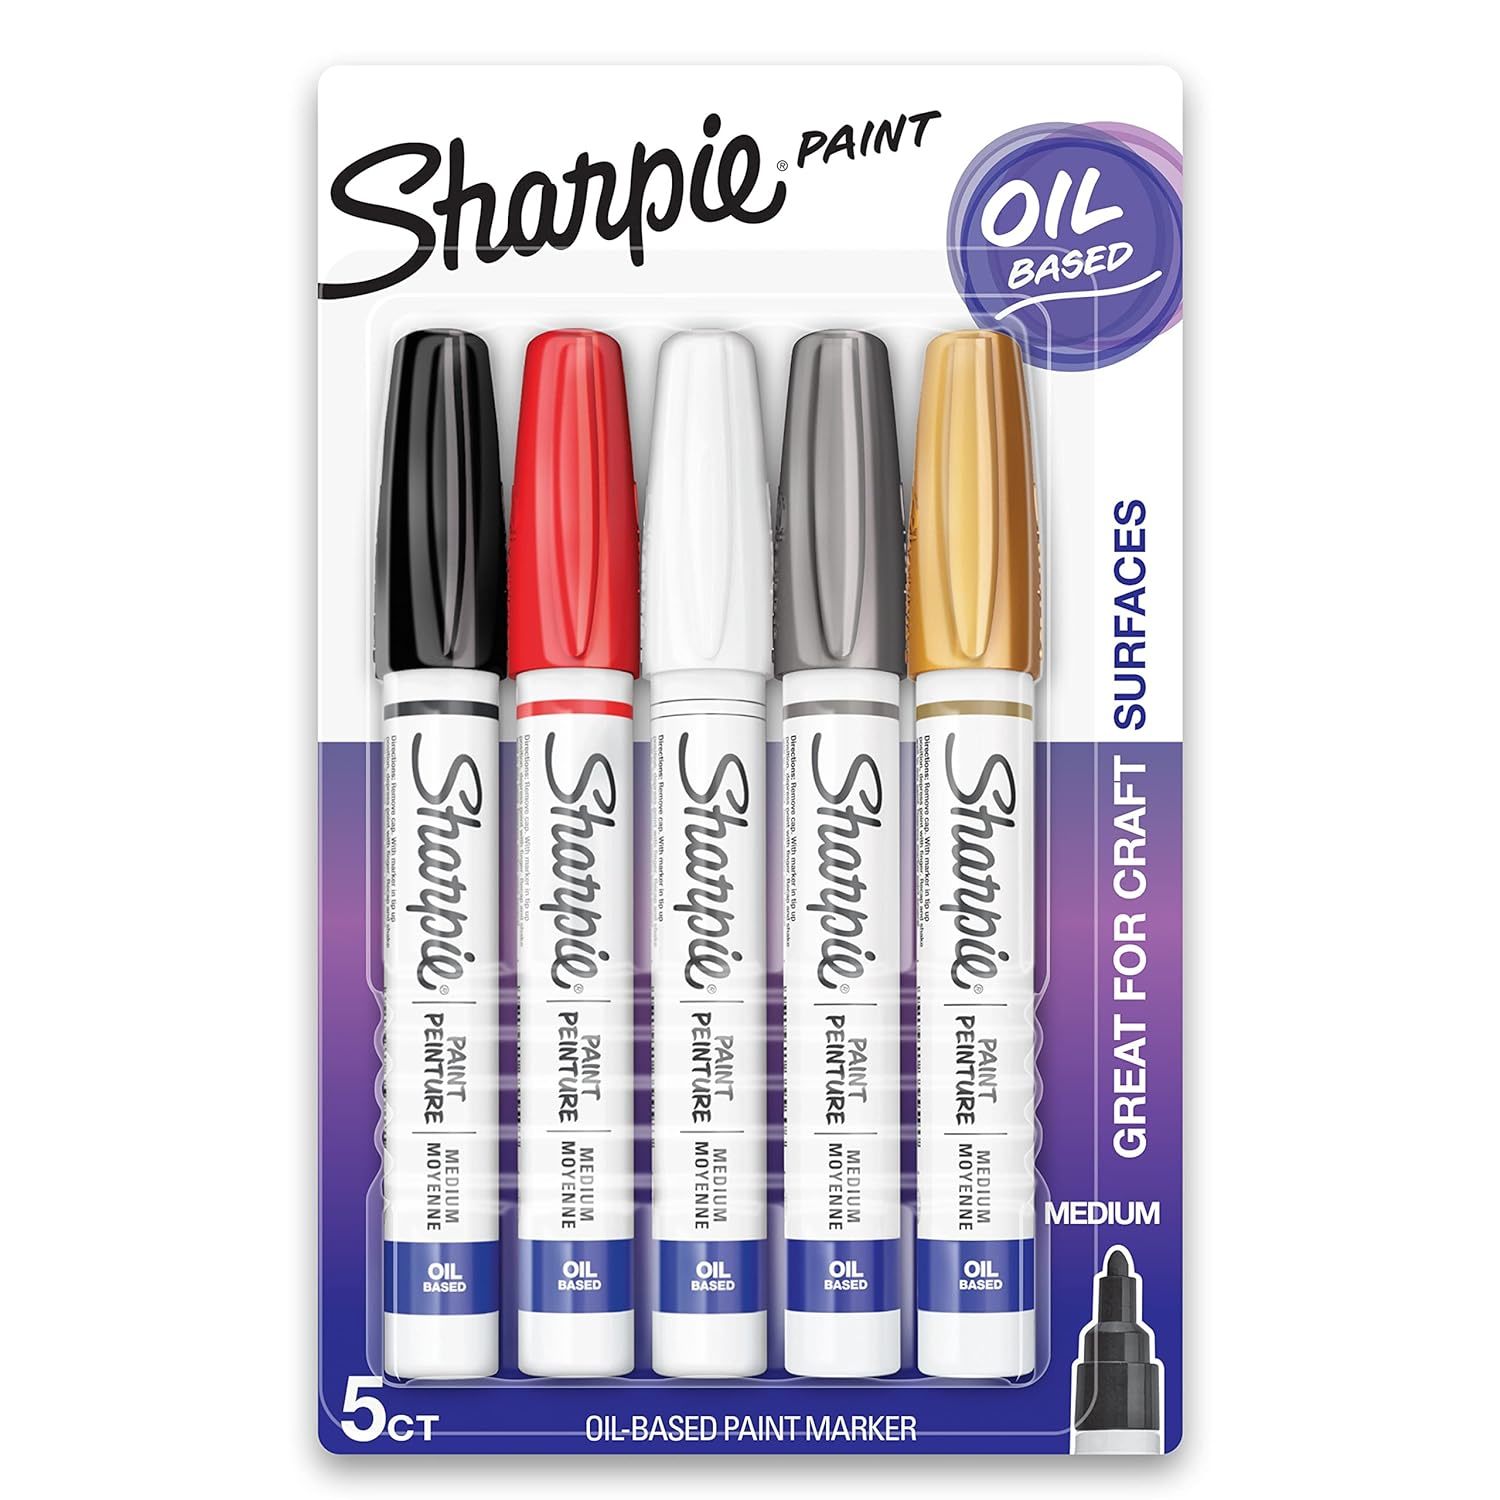  Sharpie Rub-A-Dub Laundry Marker, Pack of 3